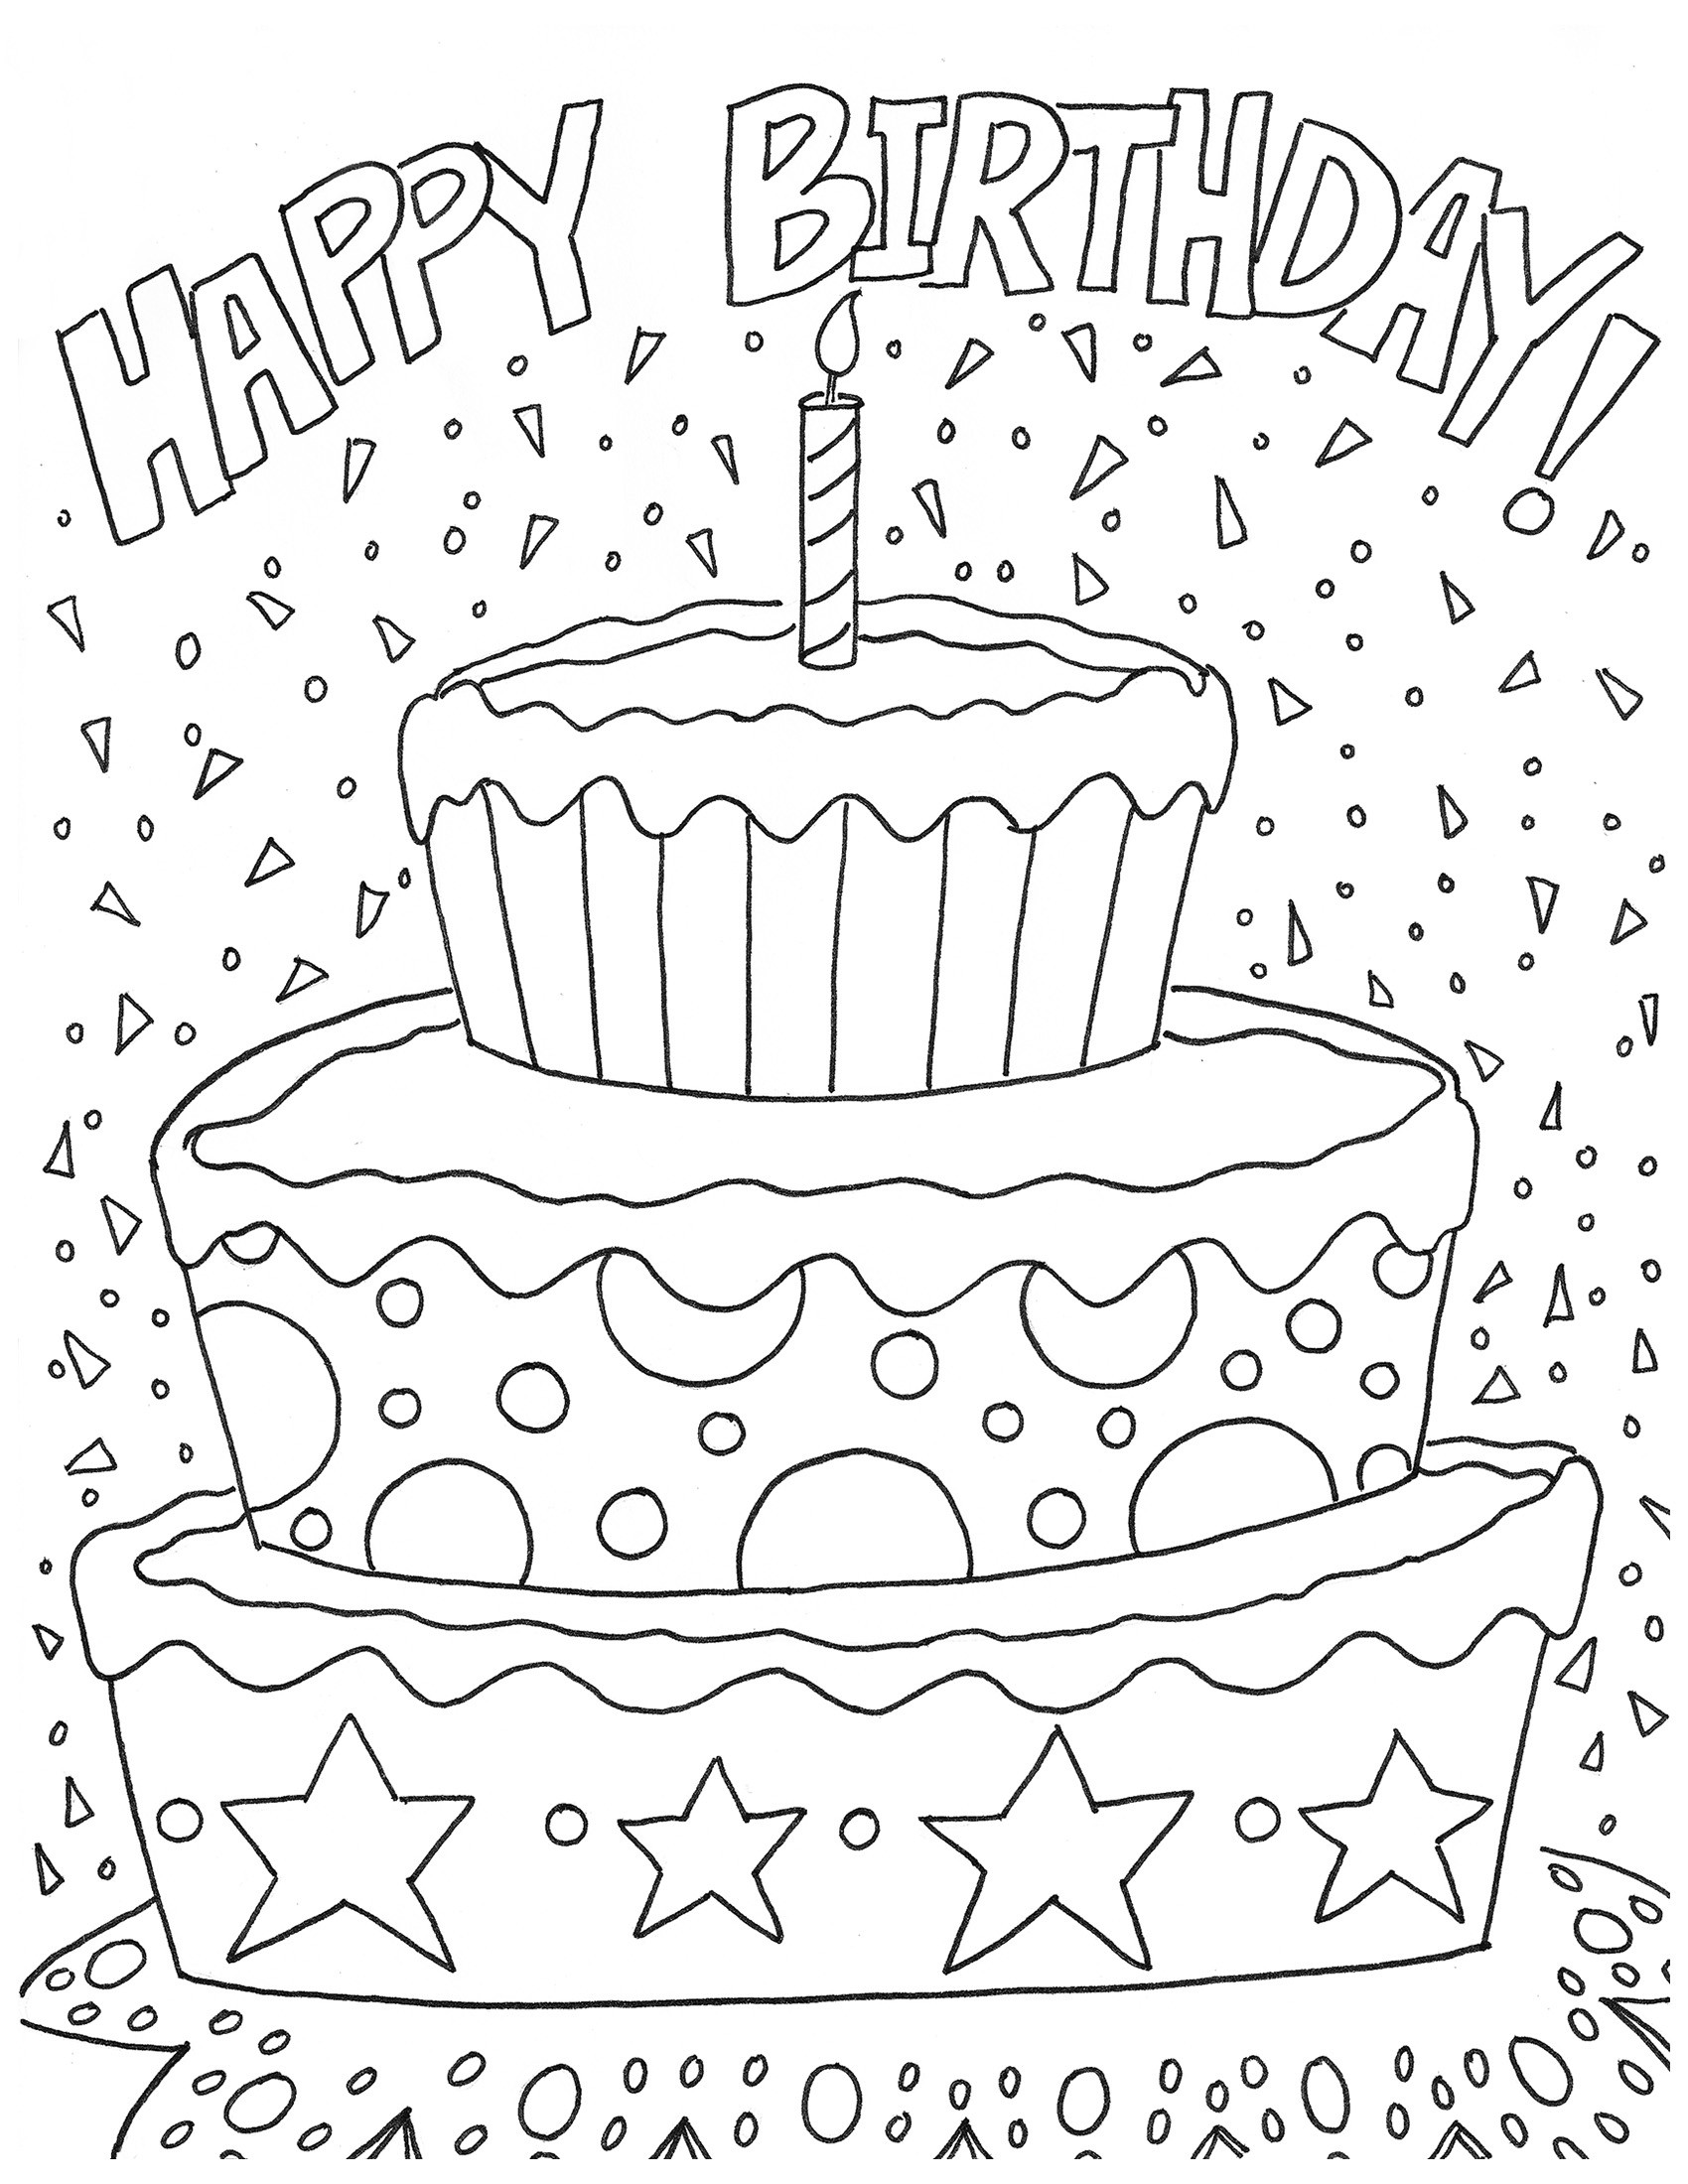 Printable Happy Birthday Coloring Pages
 artzycreations A website on how to do it yourself